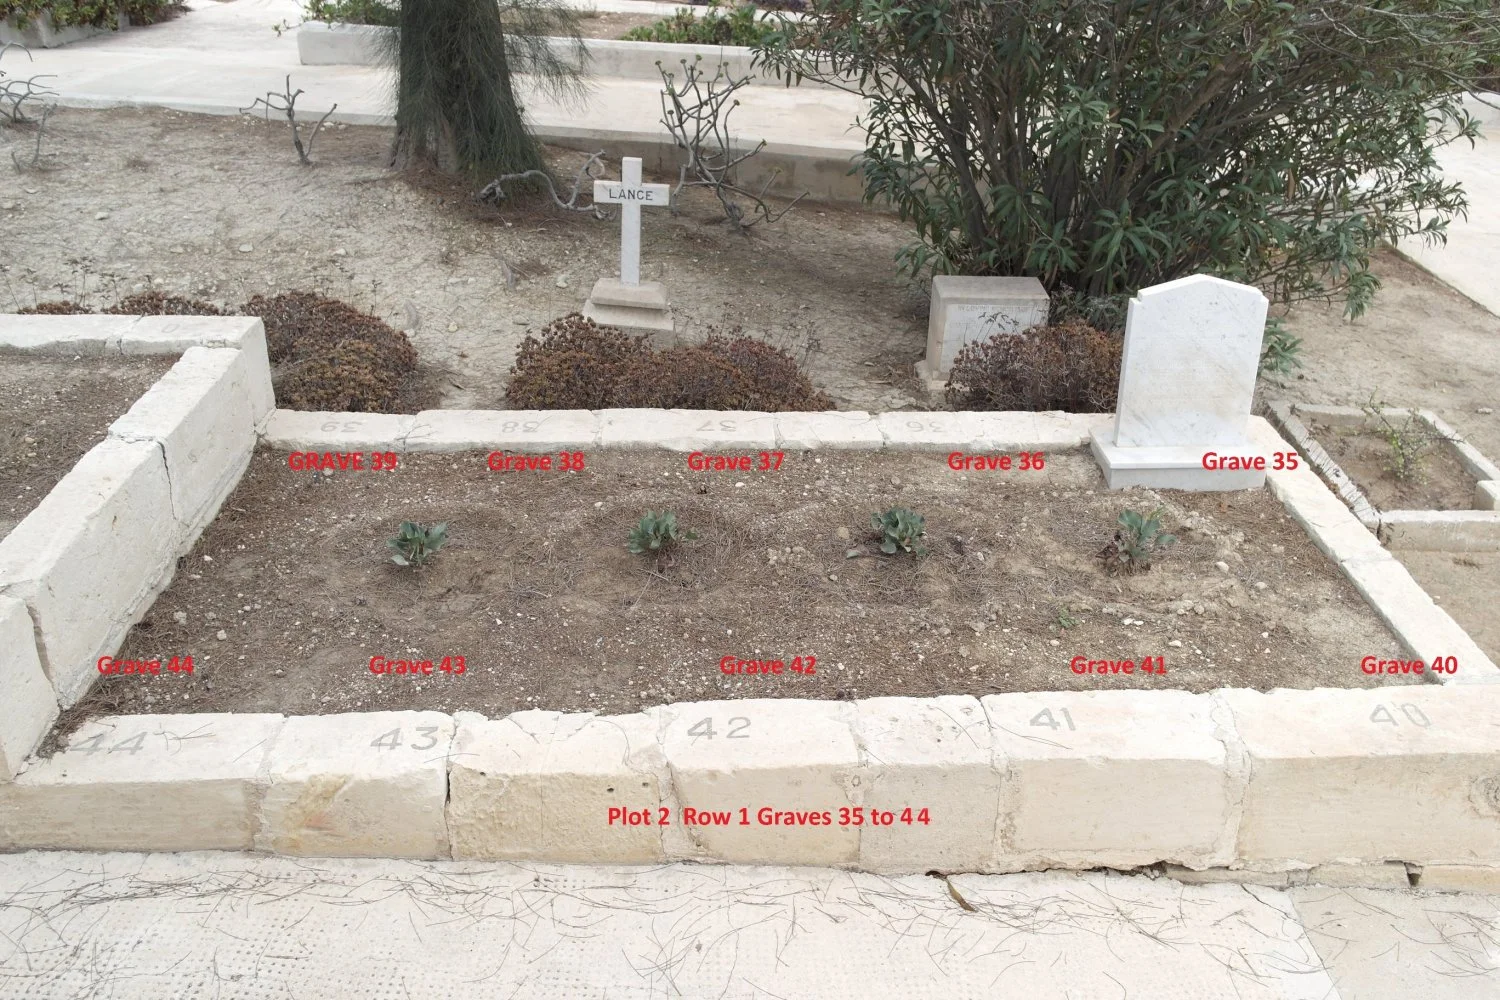 Plot 2 Row 1 Back row graves 35 to 39  Front row graves 40 to 44 Imtarfa Military Cemetery